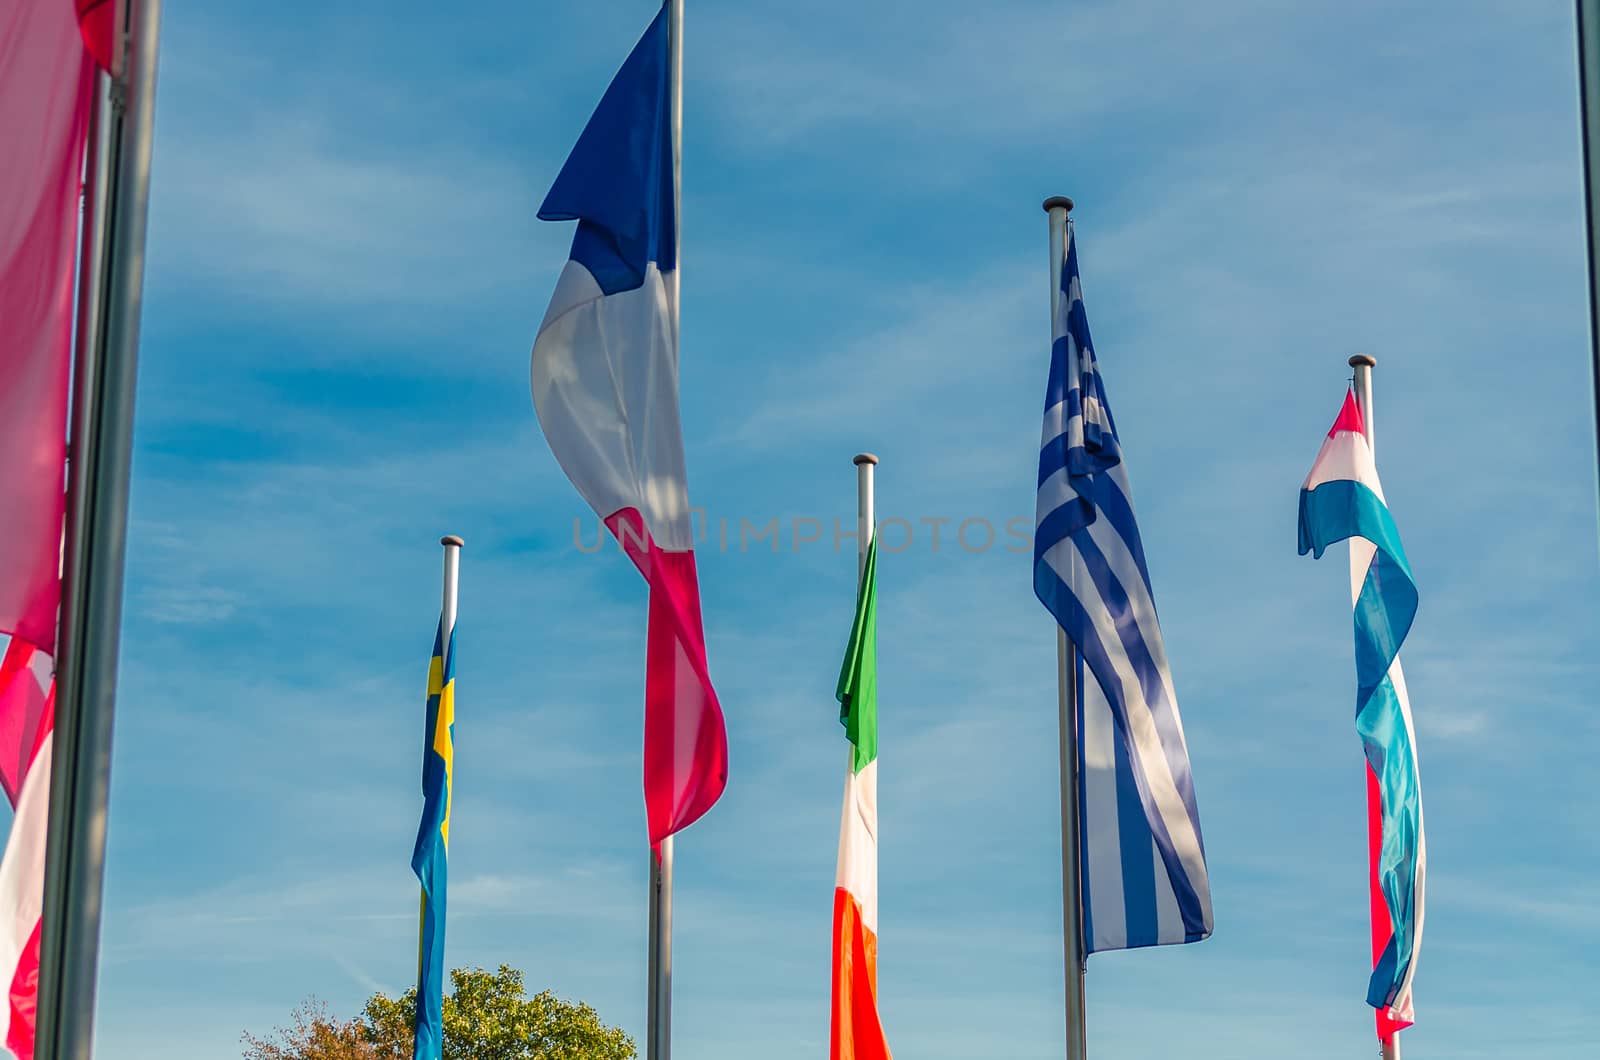 A group of international flags of various nations against blue sky.